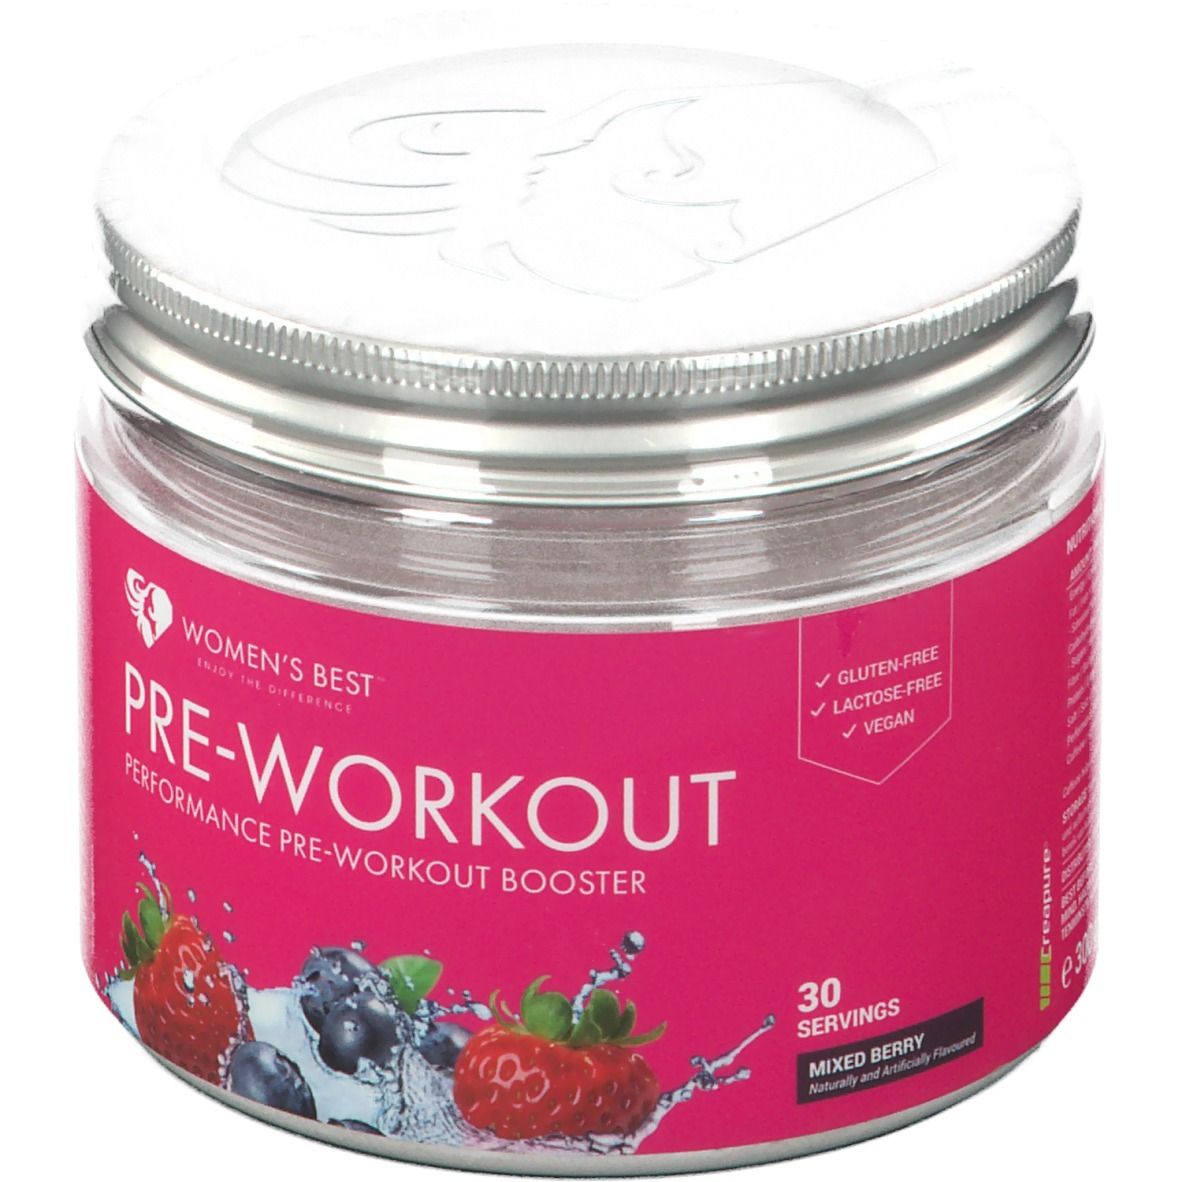 WOMENS BEST - Pre Workout Booster Crazy Fruits